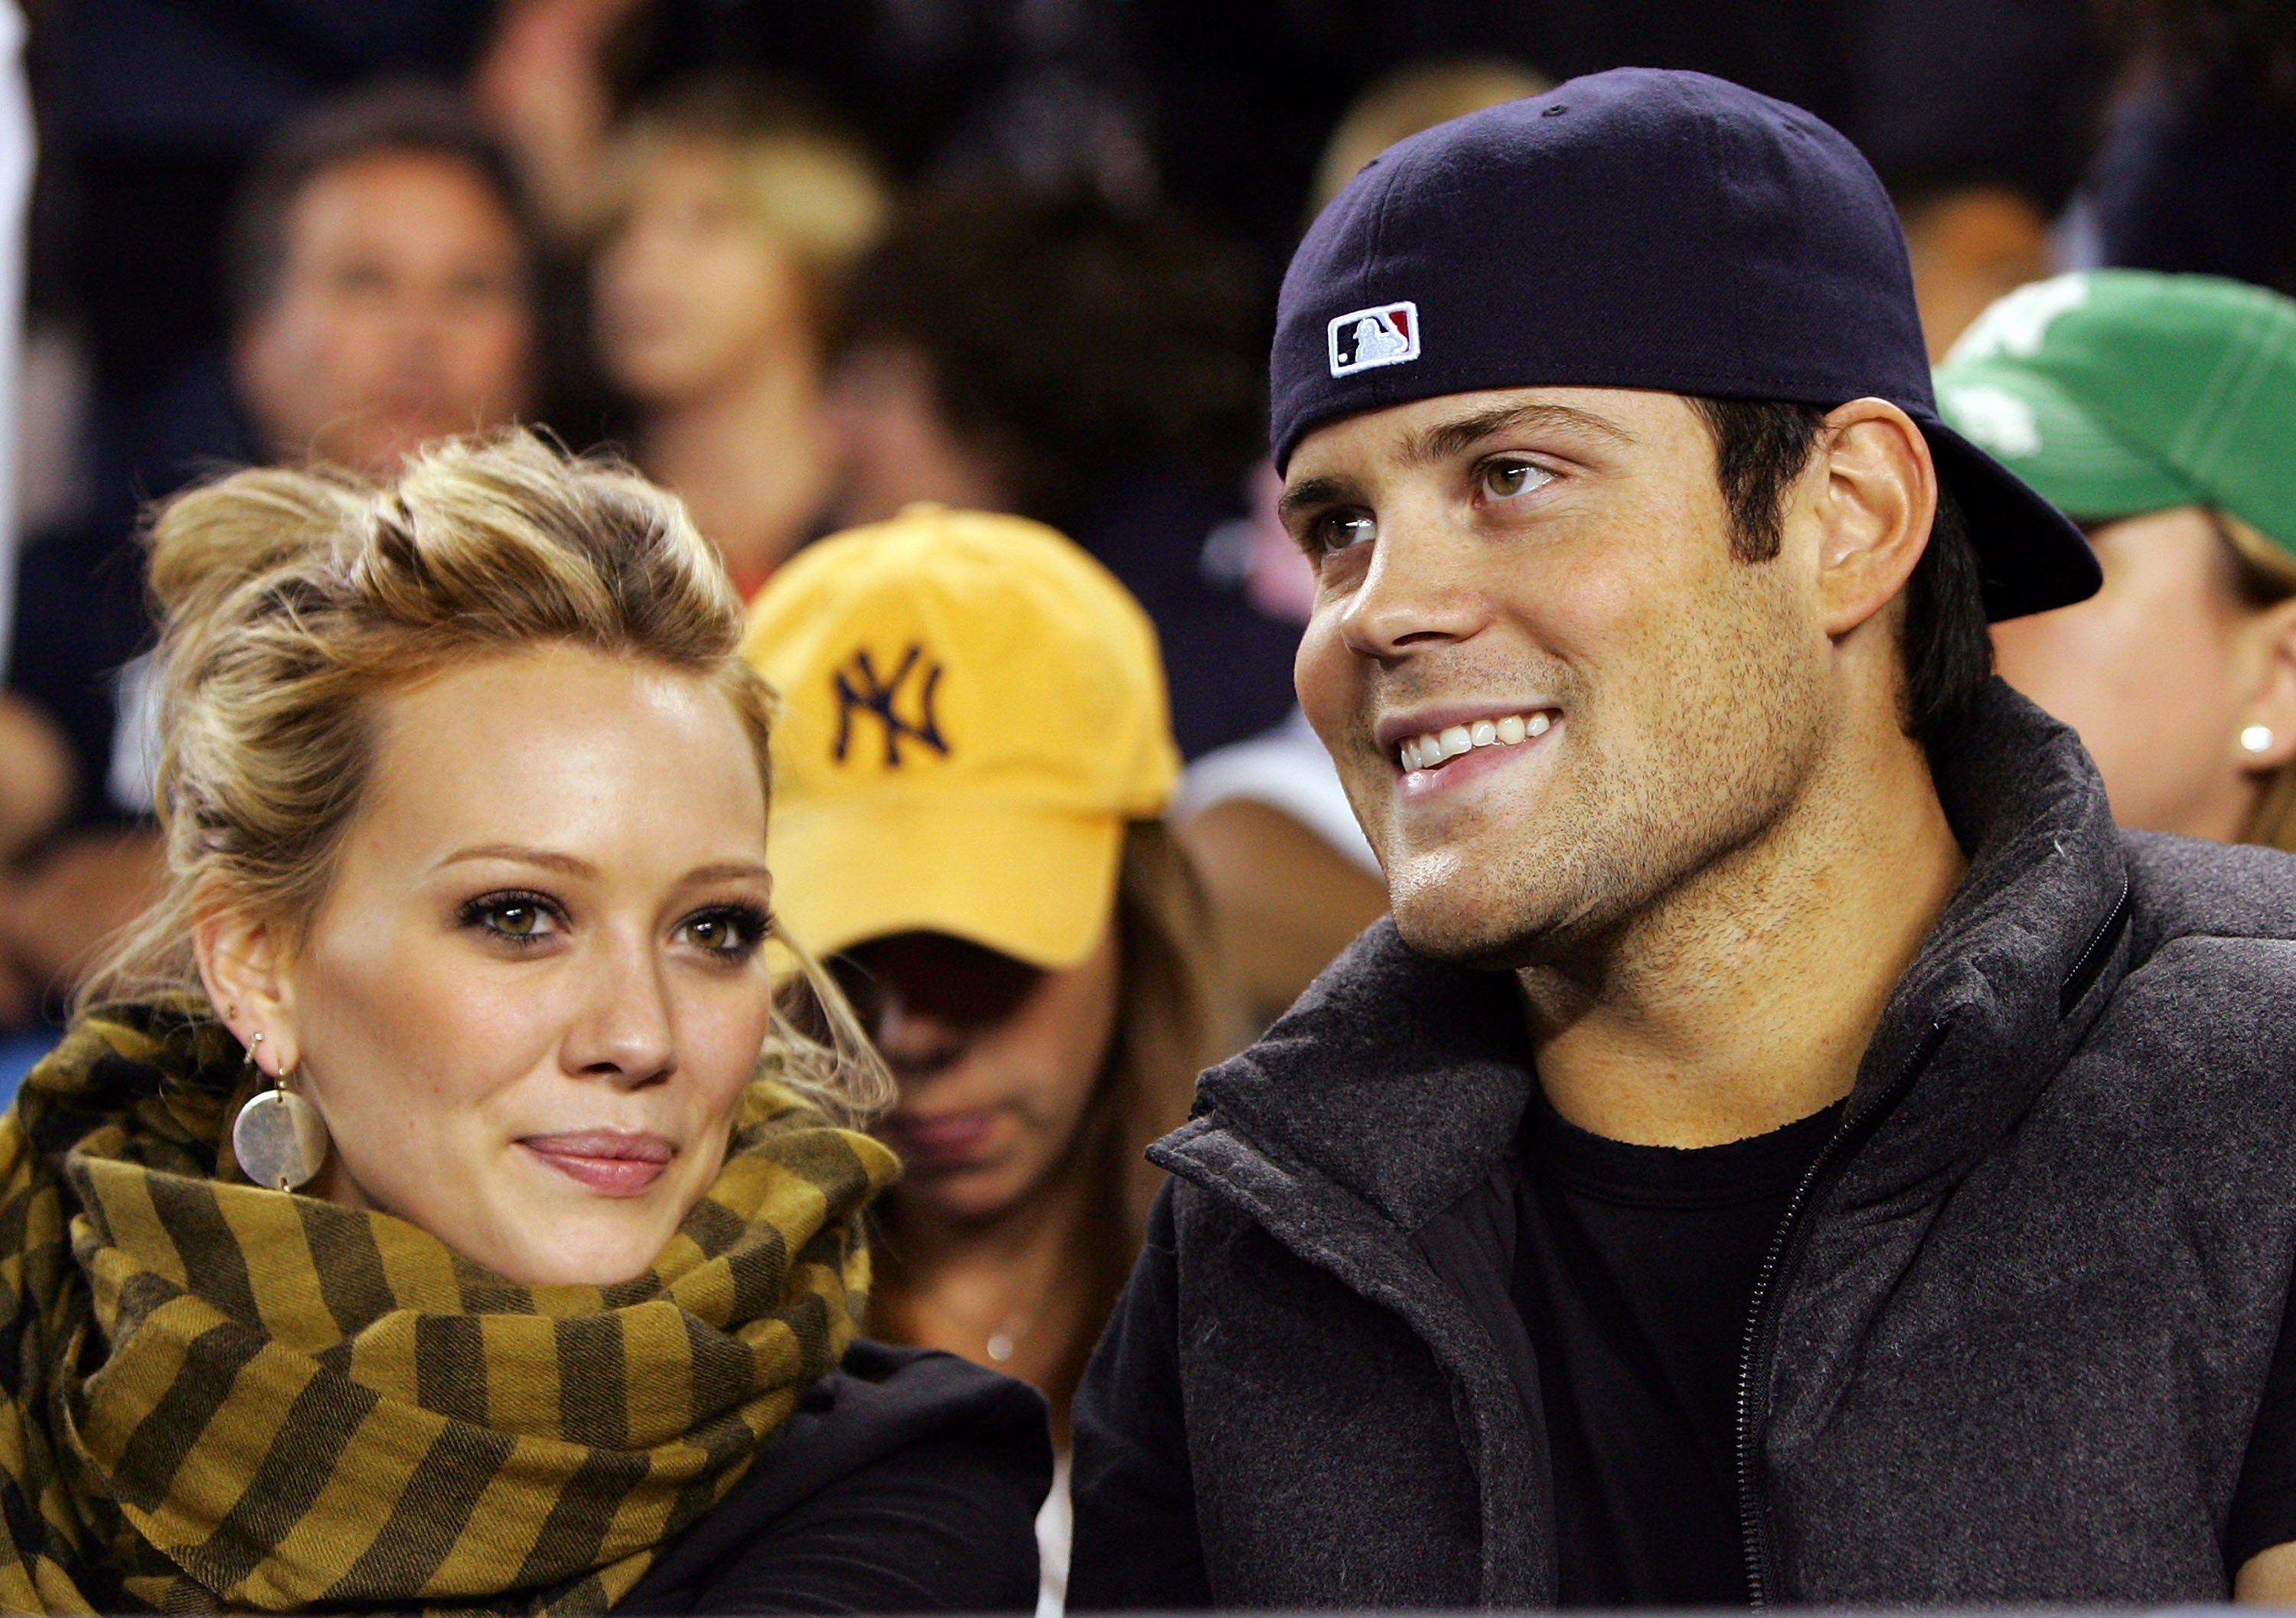 Hilary Duff and Mike Comrie attend the game on September 16, 2008 at Yankee Stadium. | Source: Getty Images.